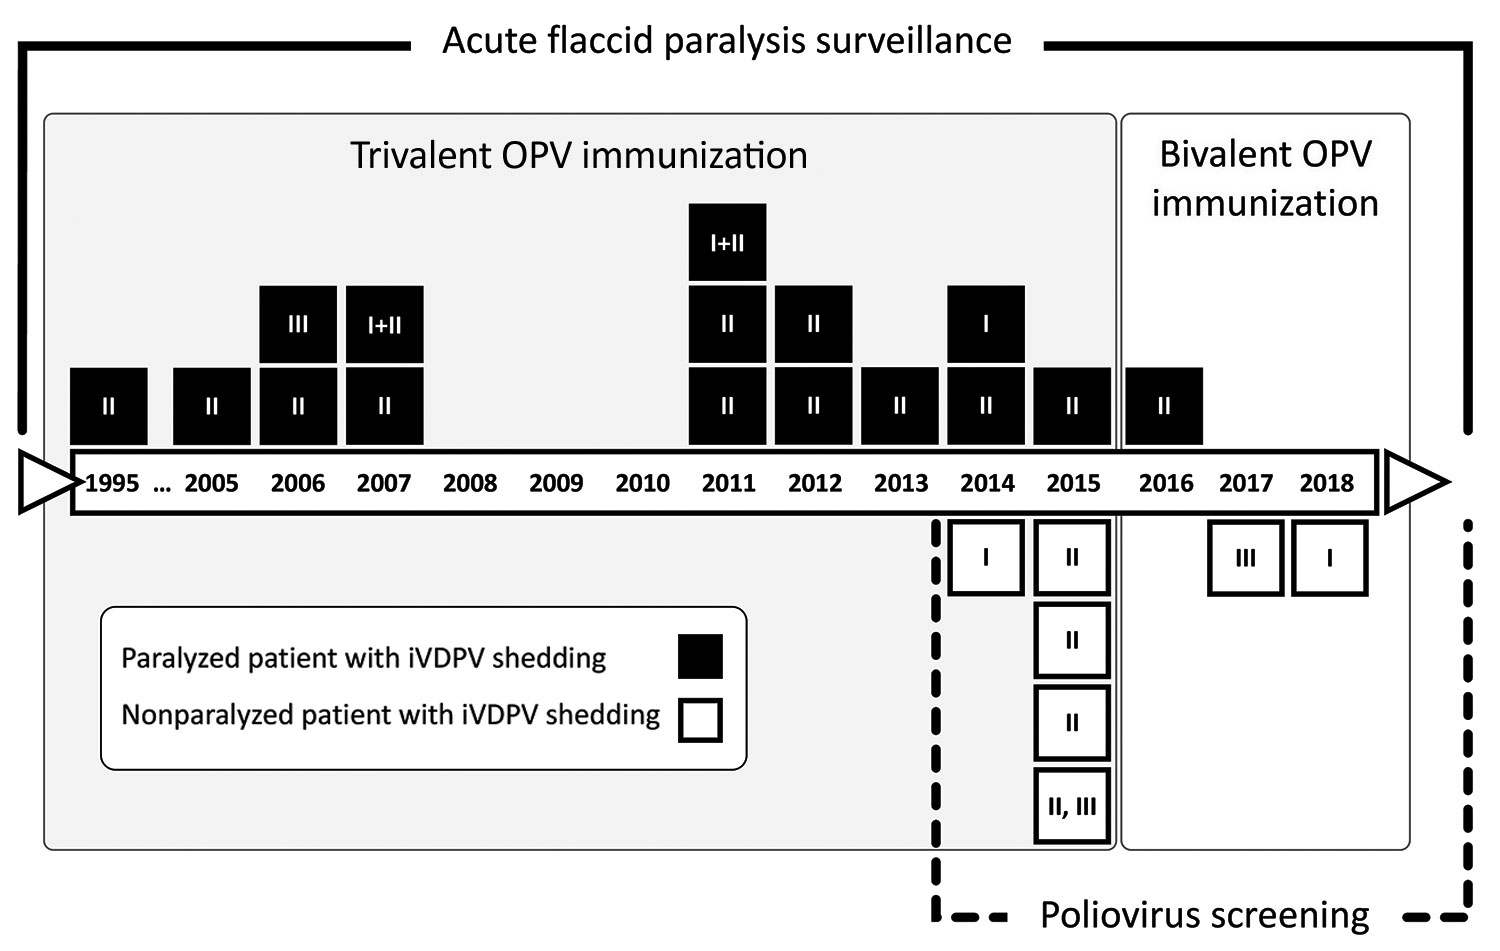 Timeline of Iran’s registry of iVDPV infection, showing the number of patients identified after acute flaccid paralysis or through screening, 1995–2018. The iVDPV detection rate was initially accelerated after implementation of the poliovirus screening program. The switch in vaccination schedule from trivalent to bivalent oral poliovirus vaccine was applied in 2016, leading to a decrease in iVDPV serotype 3 emergence. Two patients excreted iVDPVs with combined serotypes 1 and 2. One patient excr